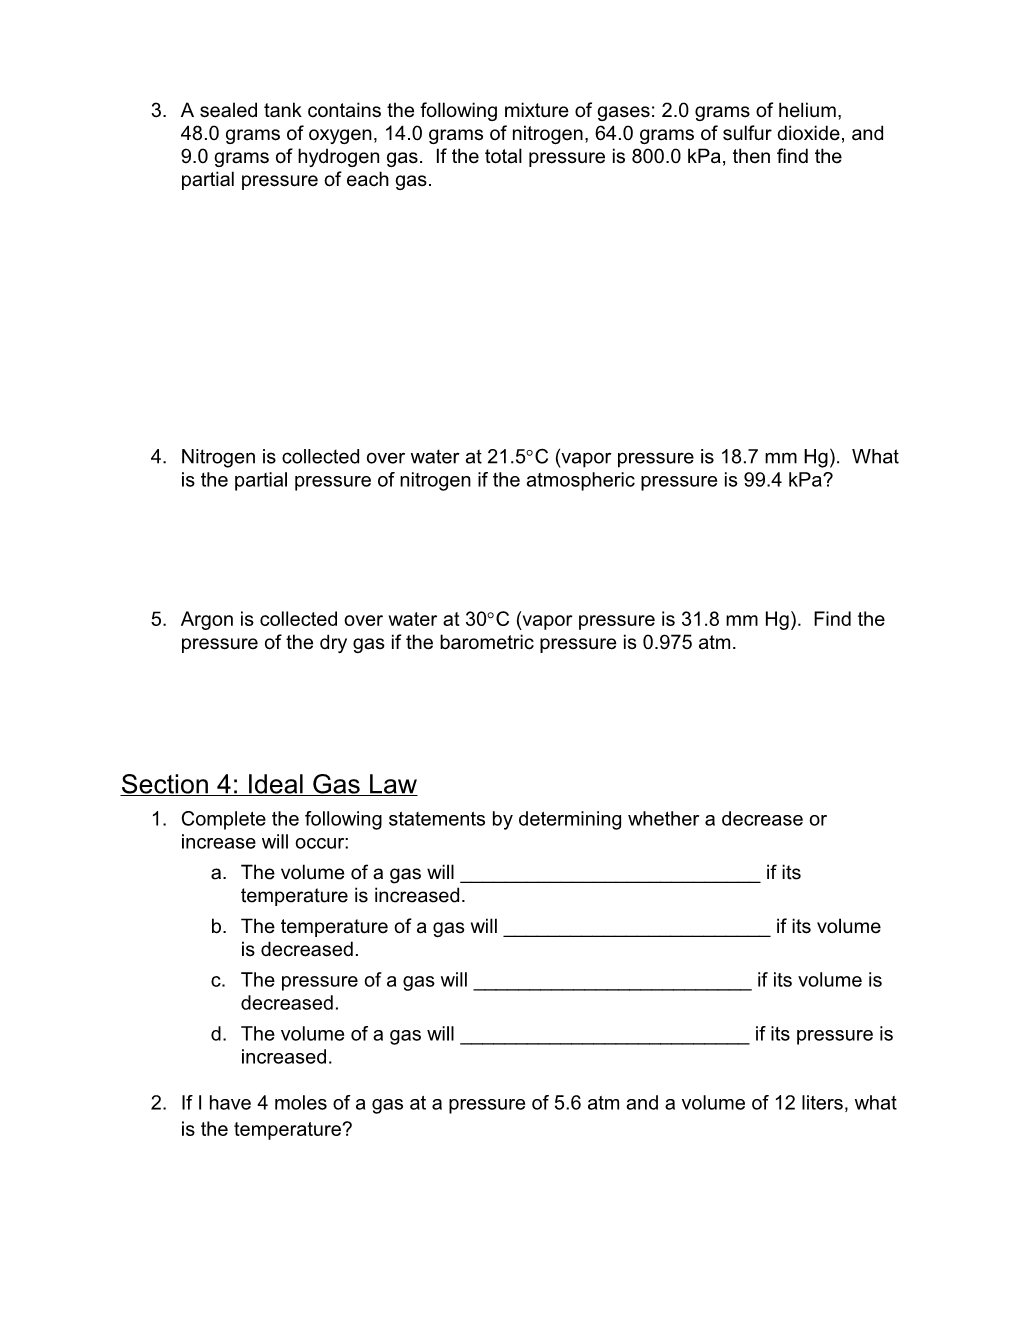 Section 1: Pressure Conversions